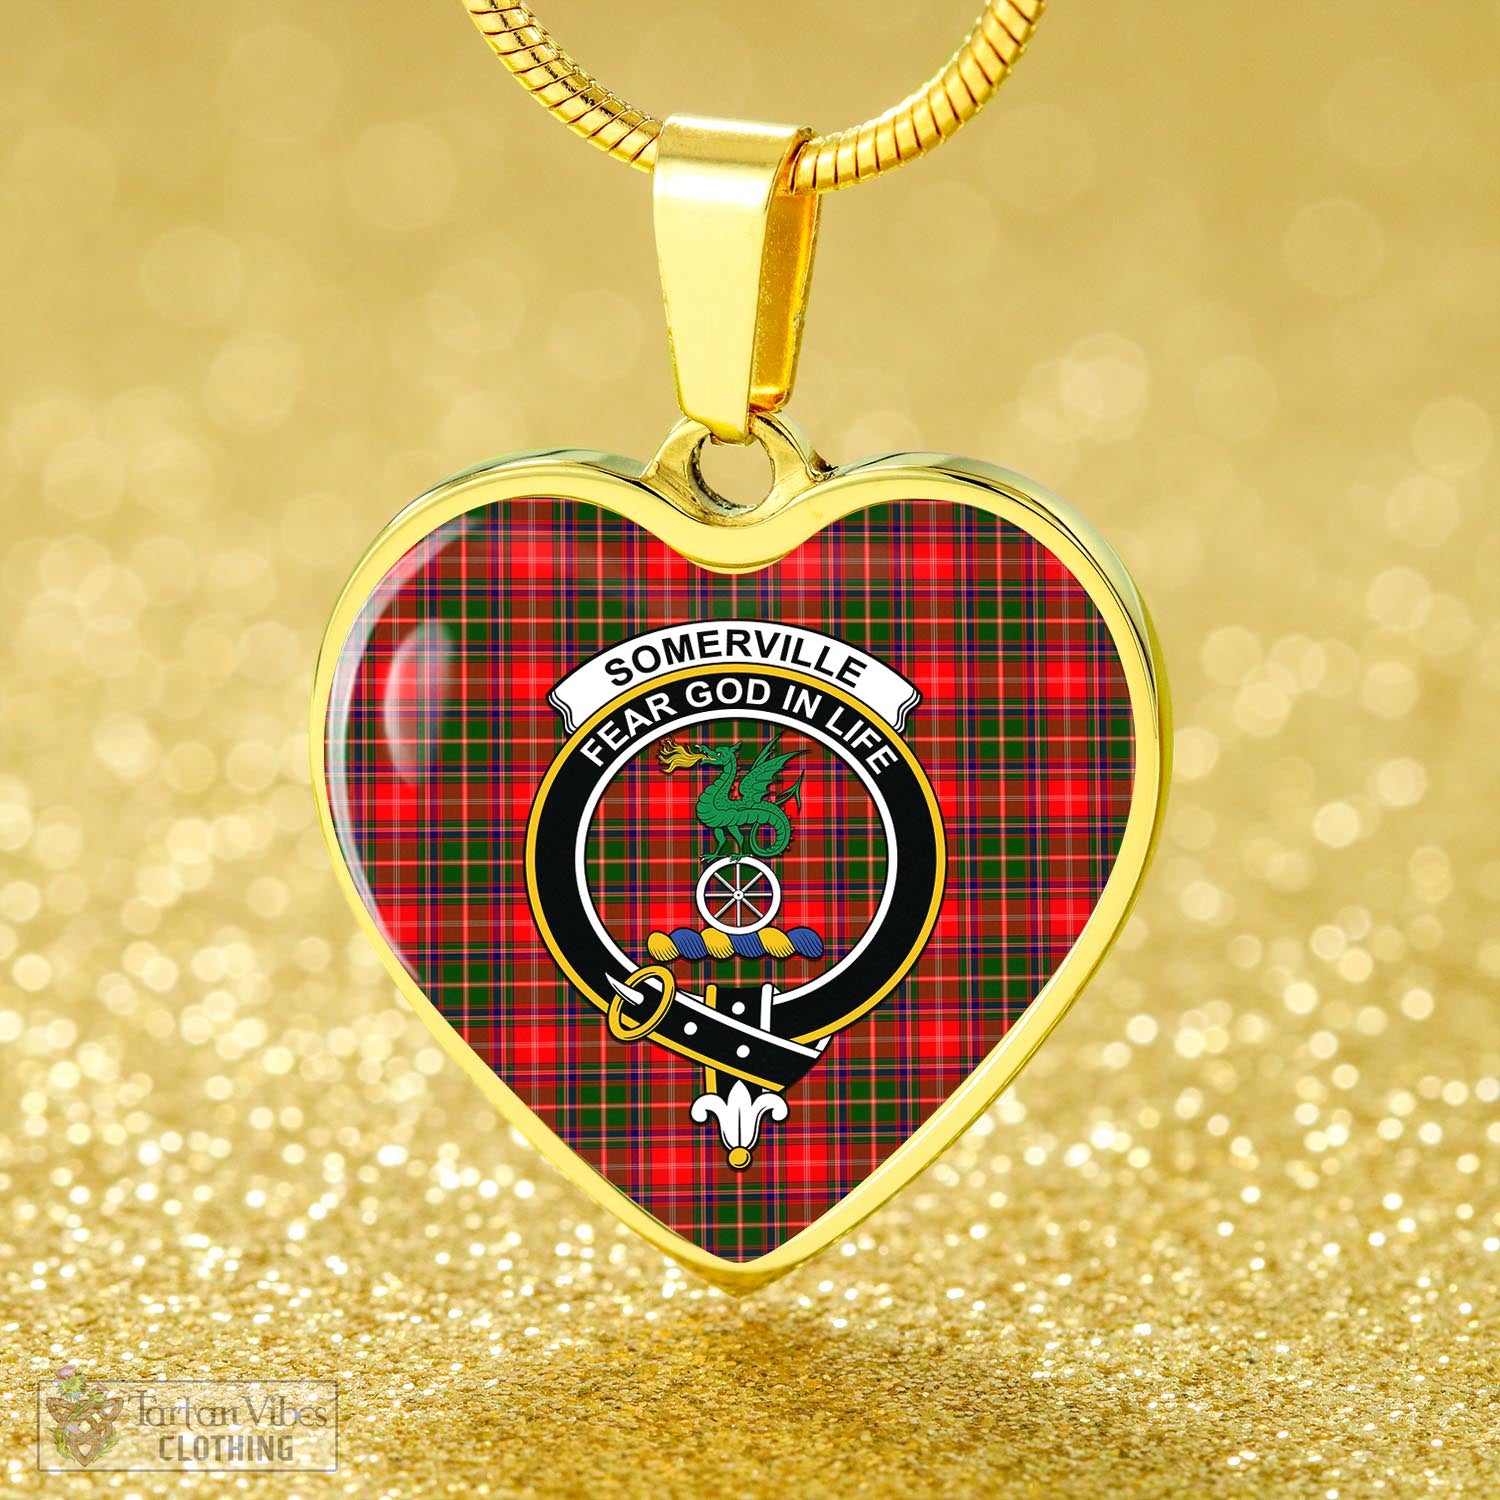 Tartan Vibes Clothing Somerville Modern Tartan Heart Necklace with Family Crest